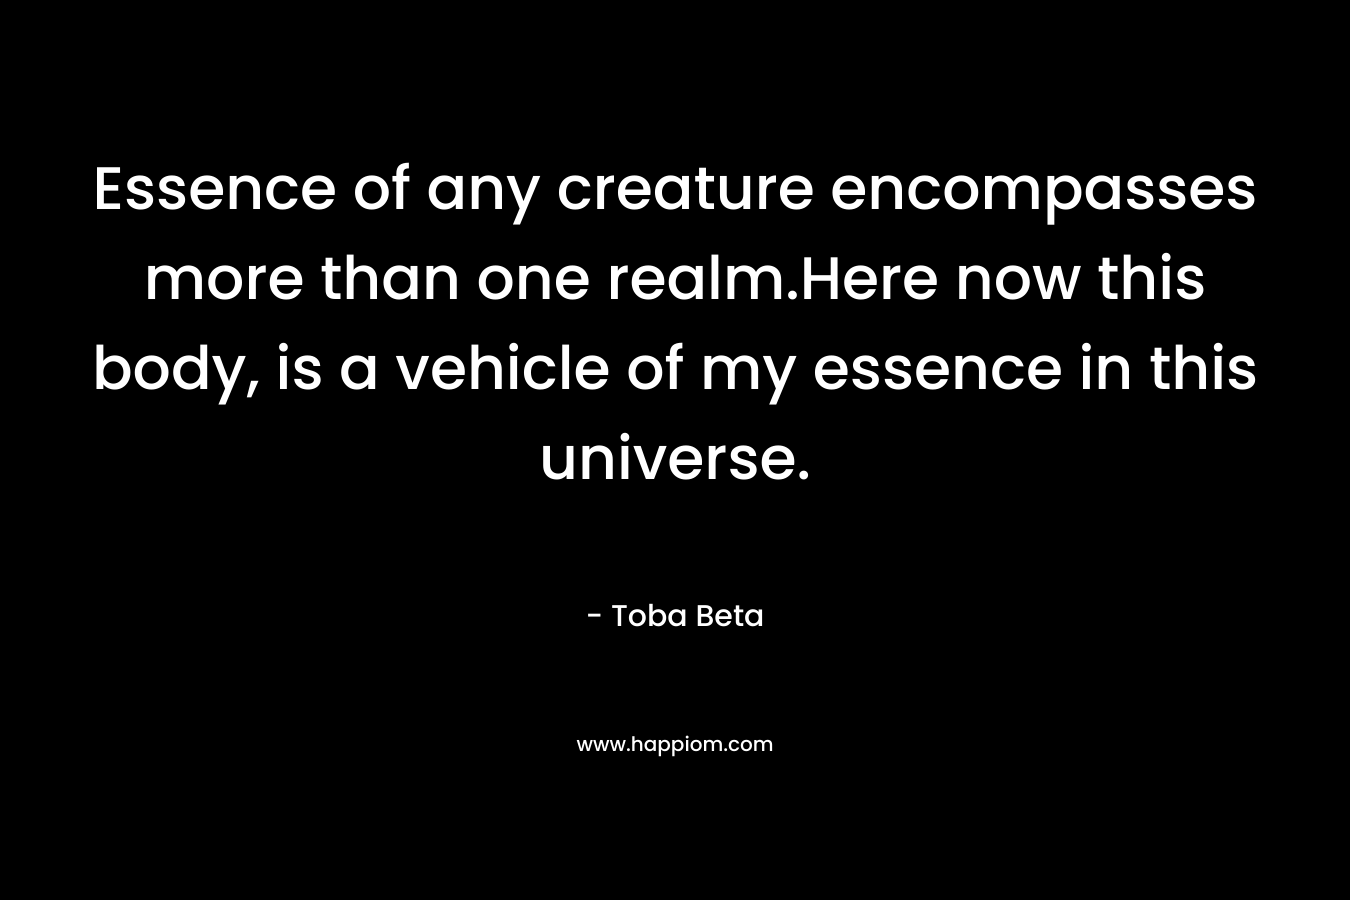 Essence of any creature encompasses more than one realm.Here now this body, is a vehicle of my essence in this universe.